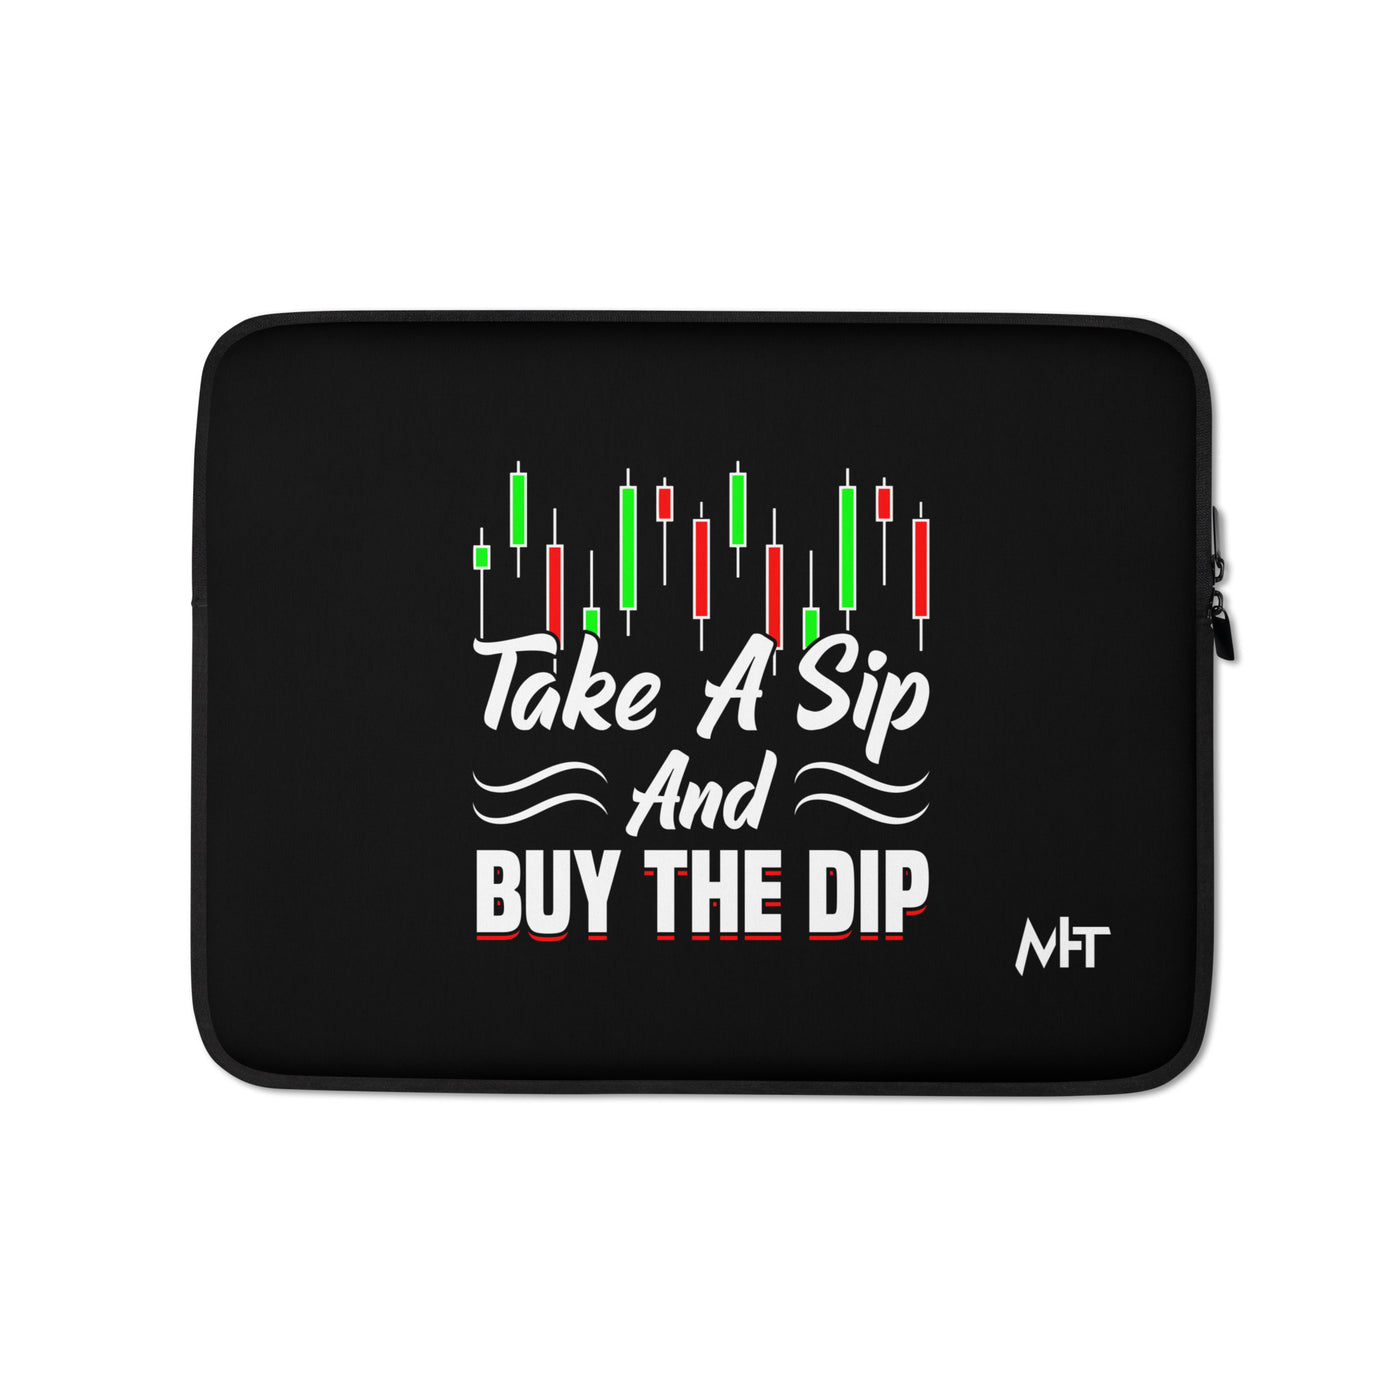 Take a Sip and Buy the Dip - Laptop Sleeve